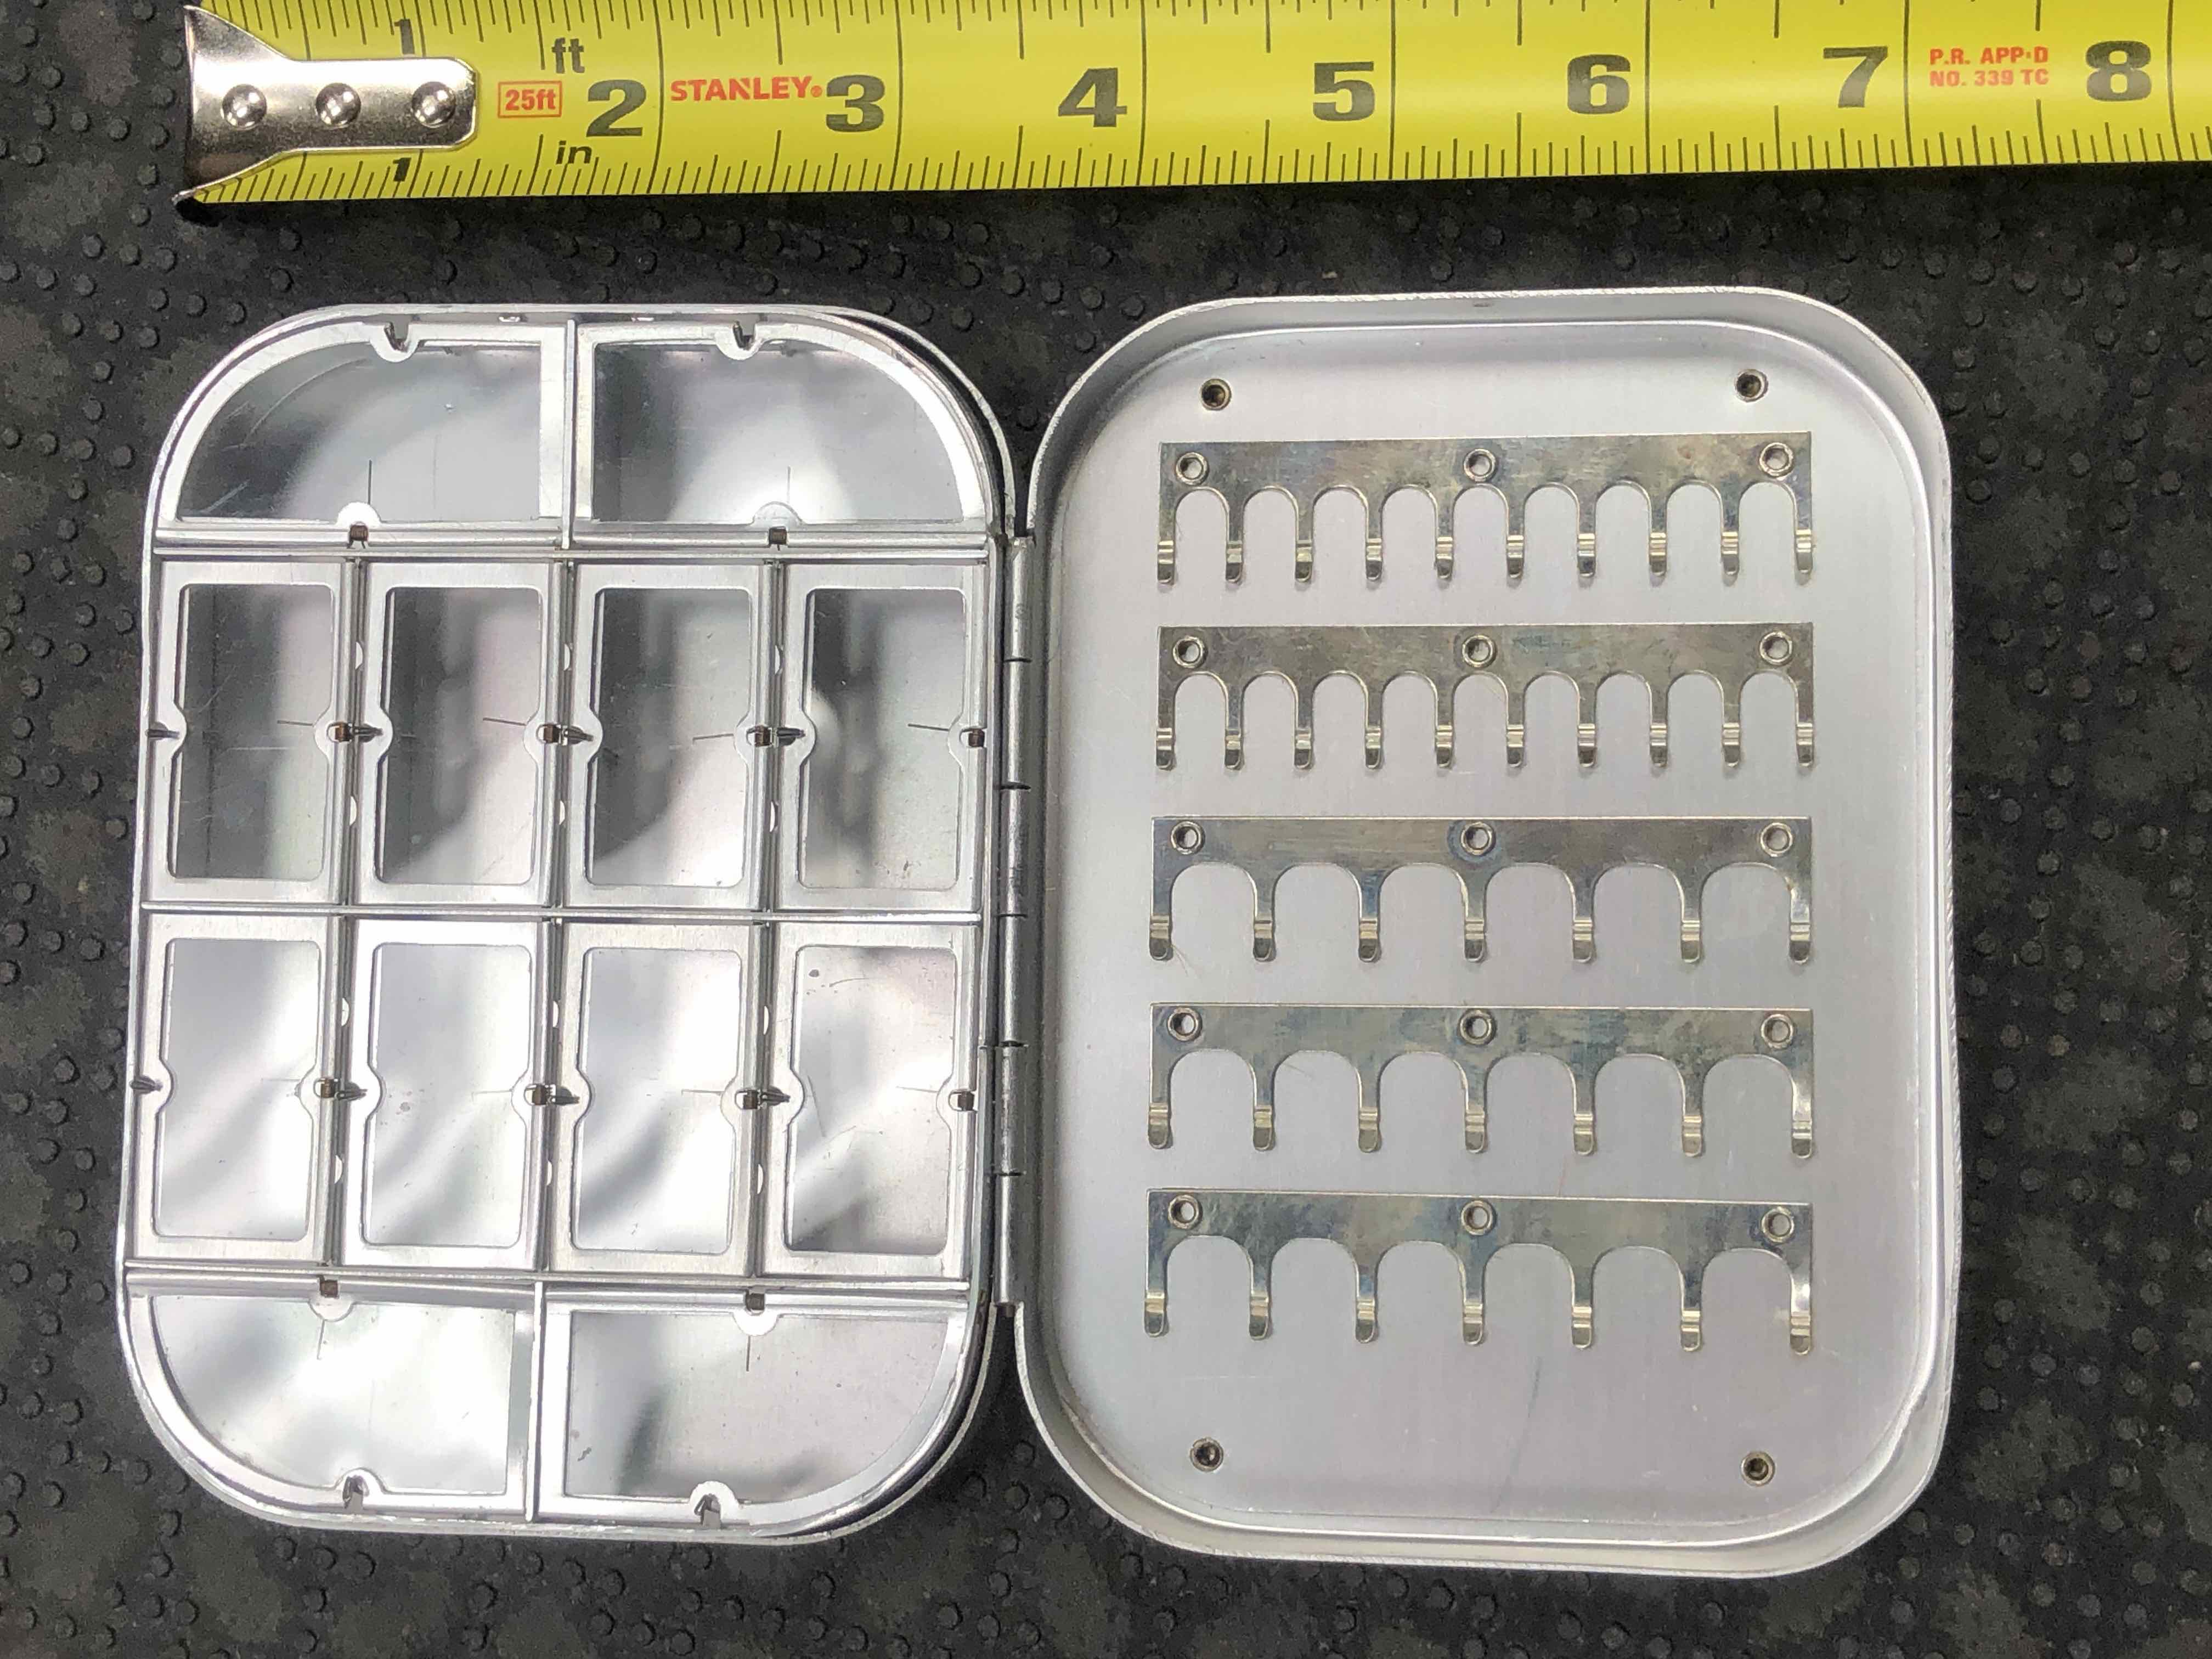 https://thefirstcast.ca/wp-content/uploads/2019/05/Richard-Wheatley-Silmalloy-Metal-Fly-Box-12-Compartment-Plus-5-Rows-of-Number-7-Small-Clips-5-x-3-12-x-1-BB.jpg